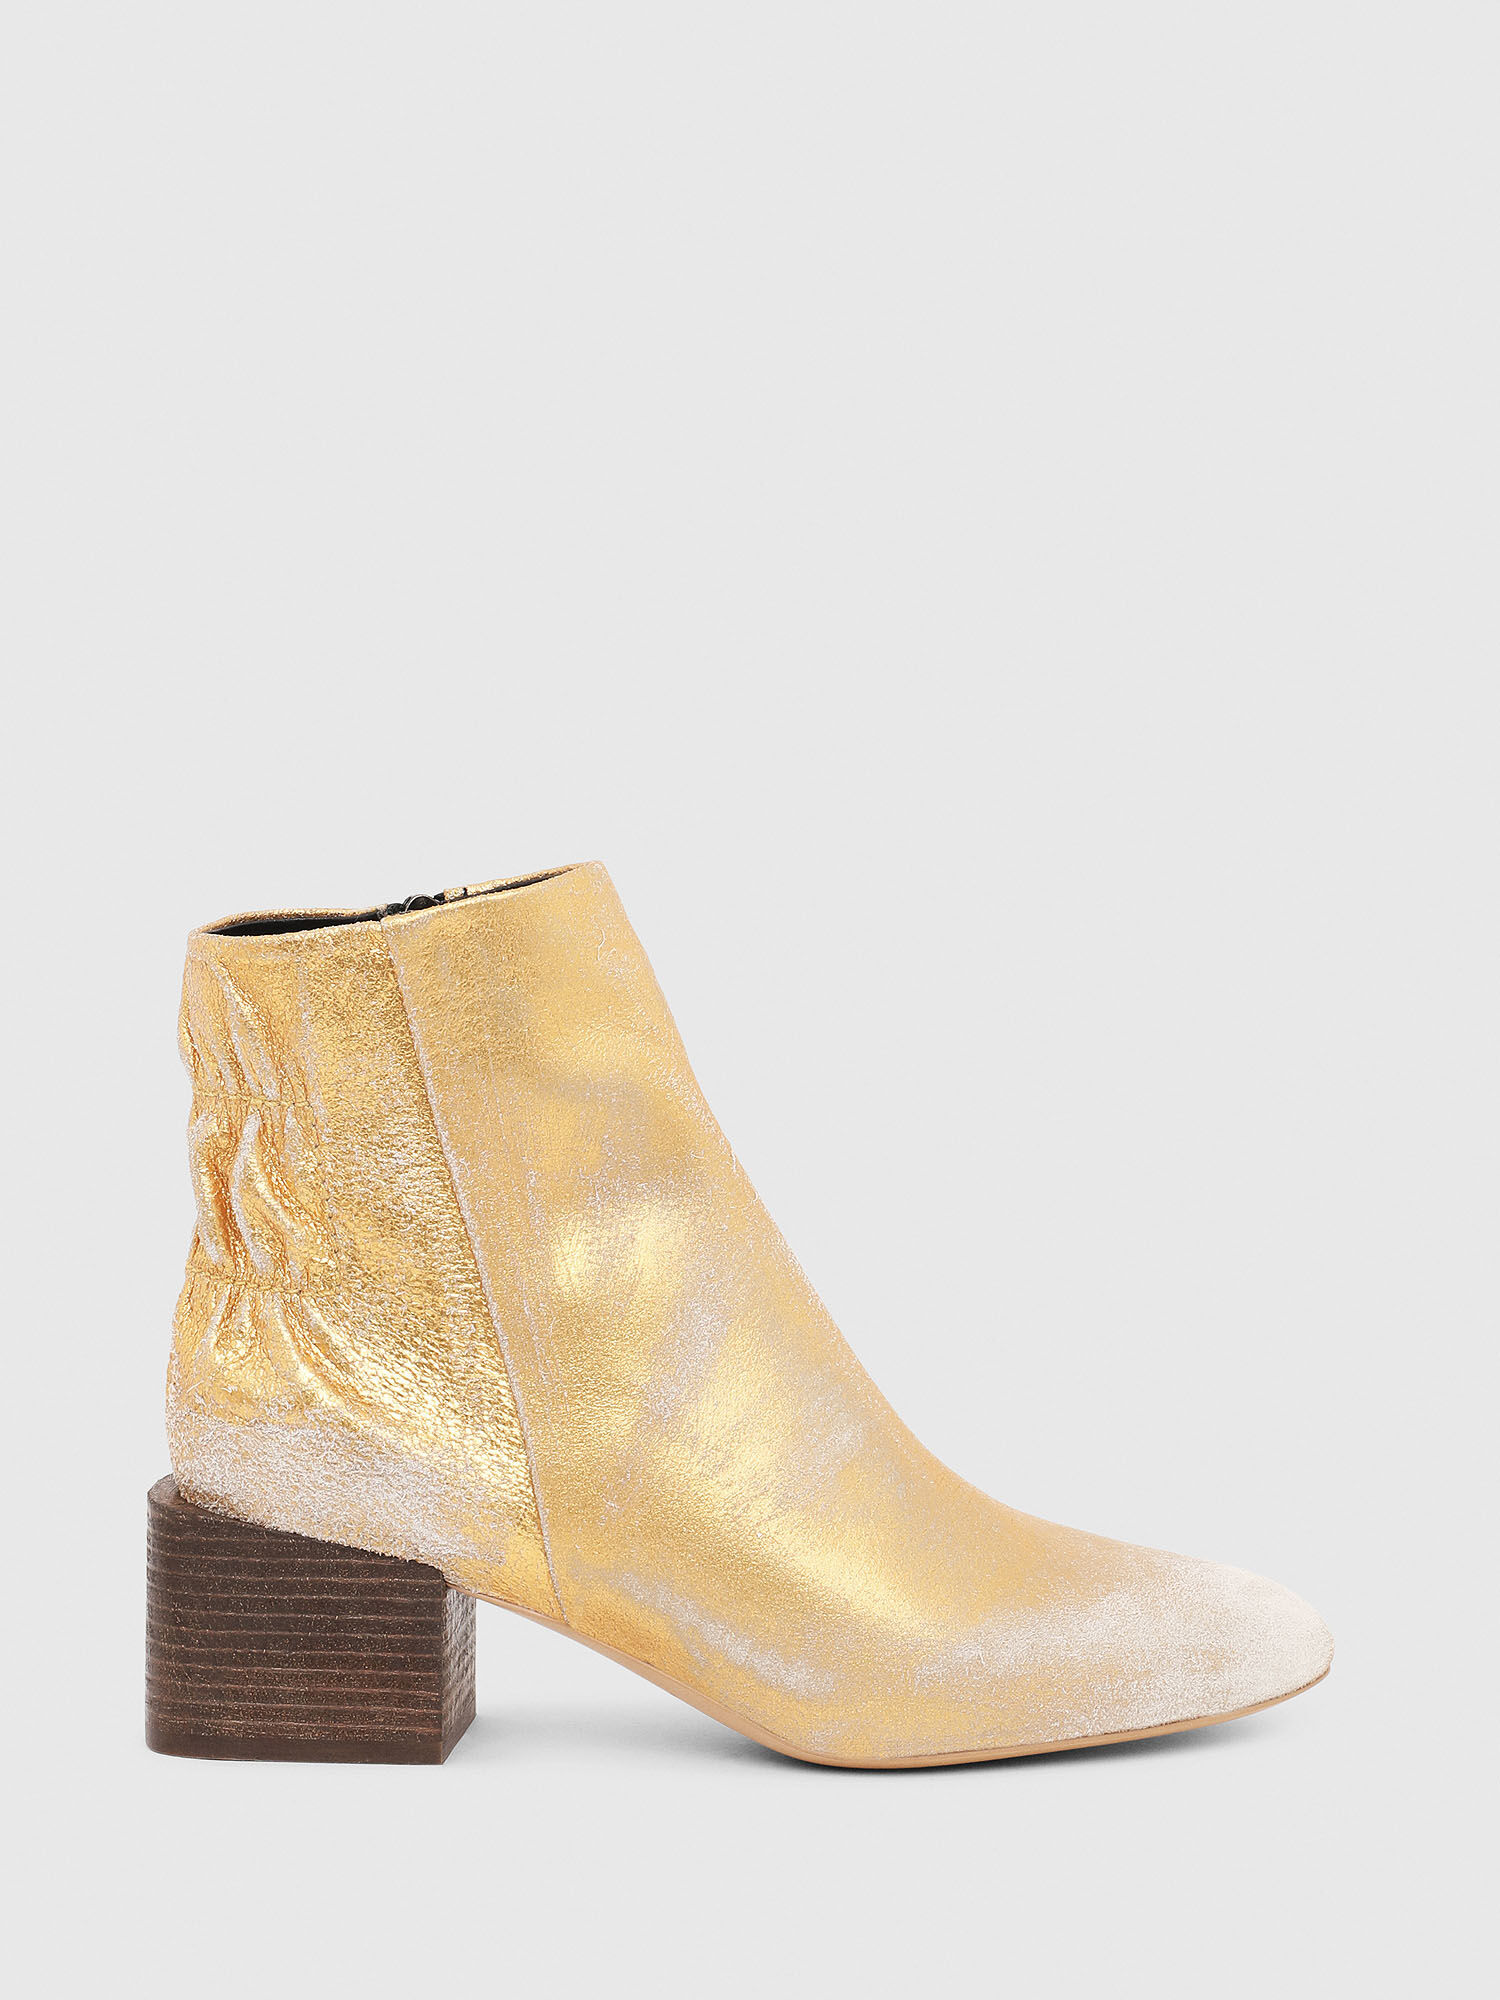 gold ankle boots uk